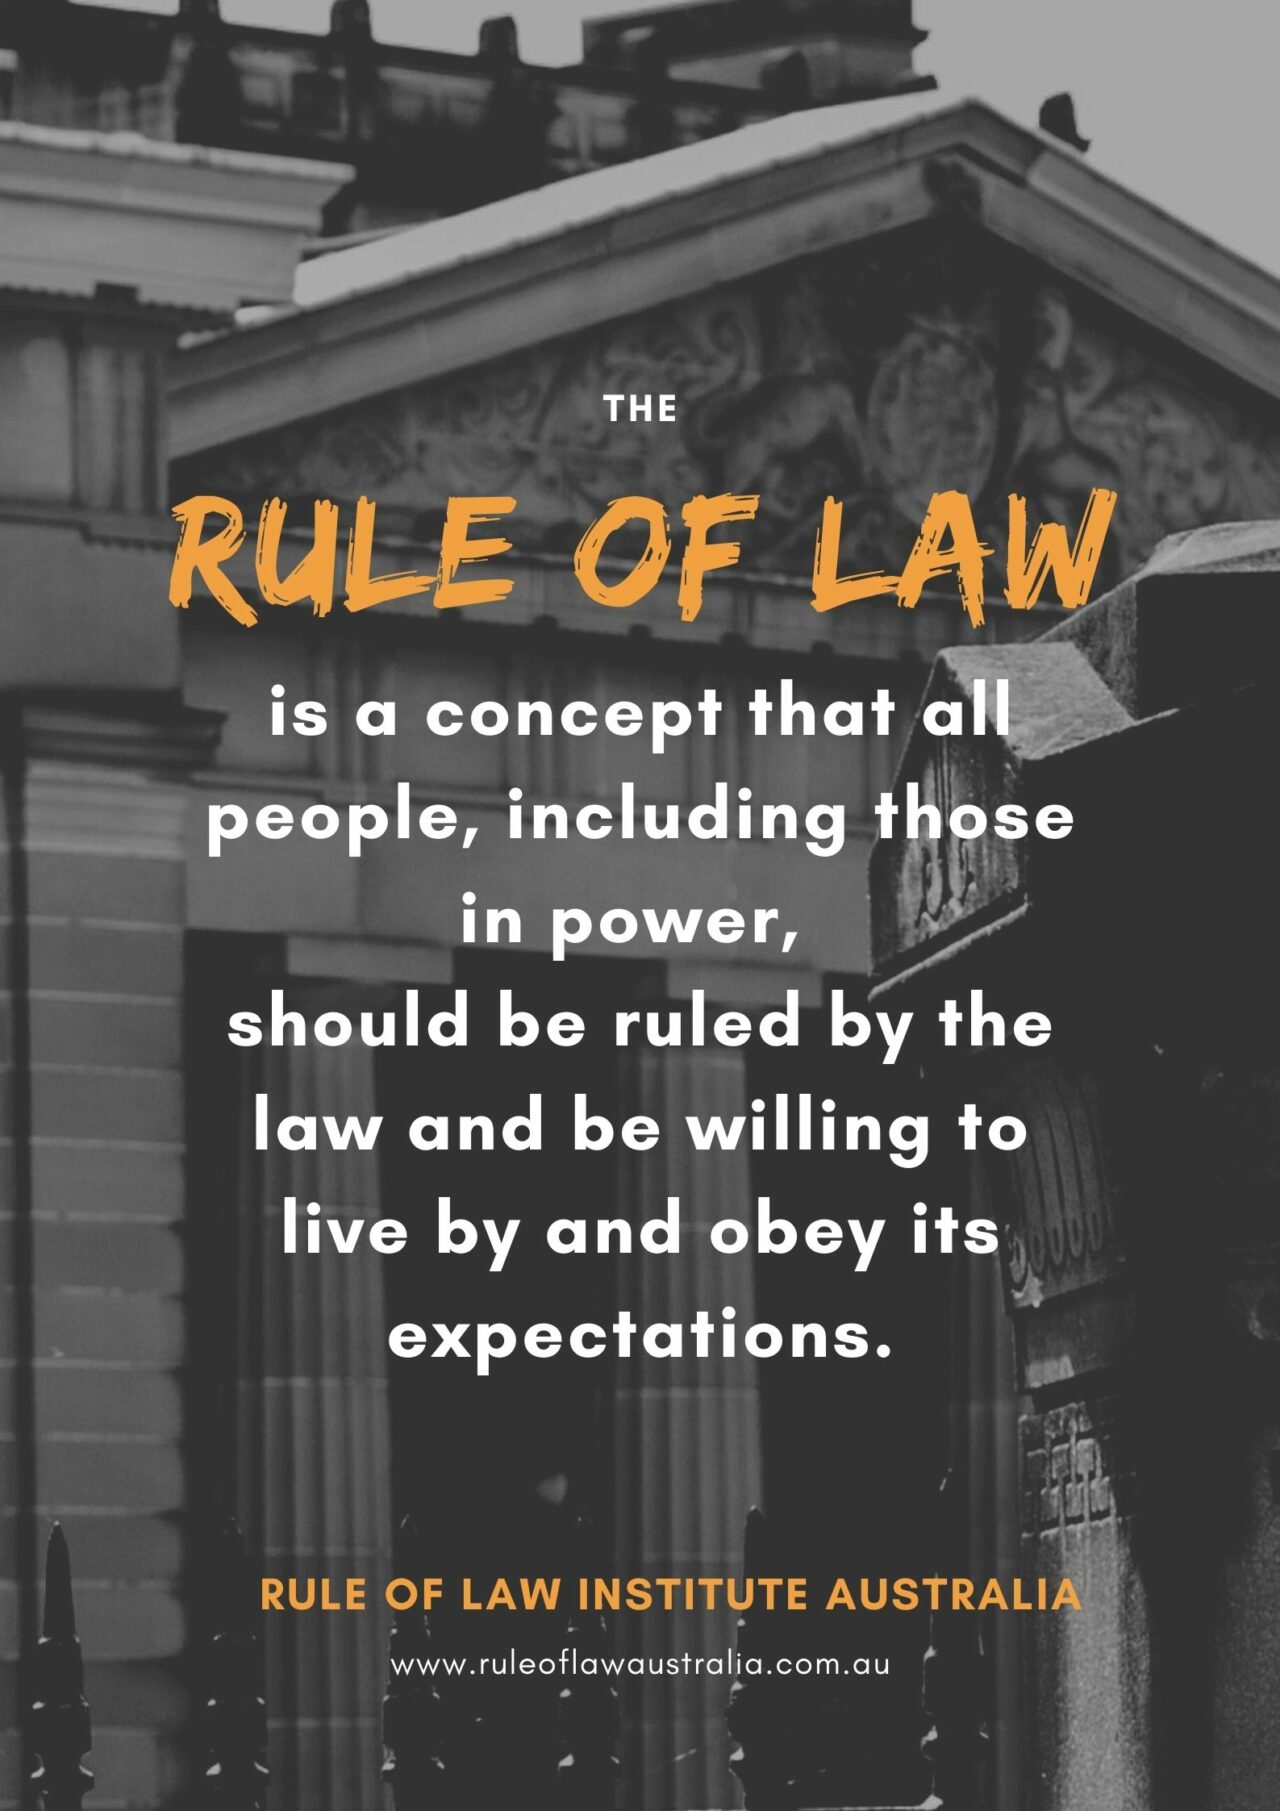 research topics on rule of law